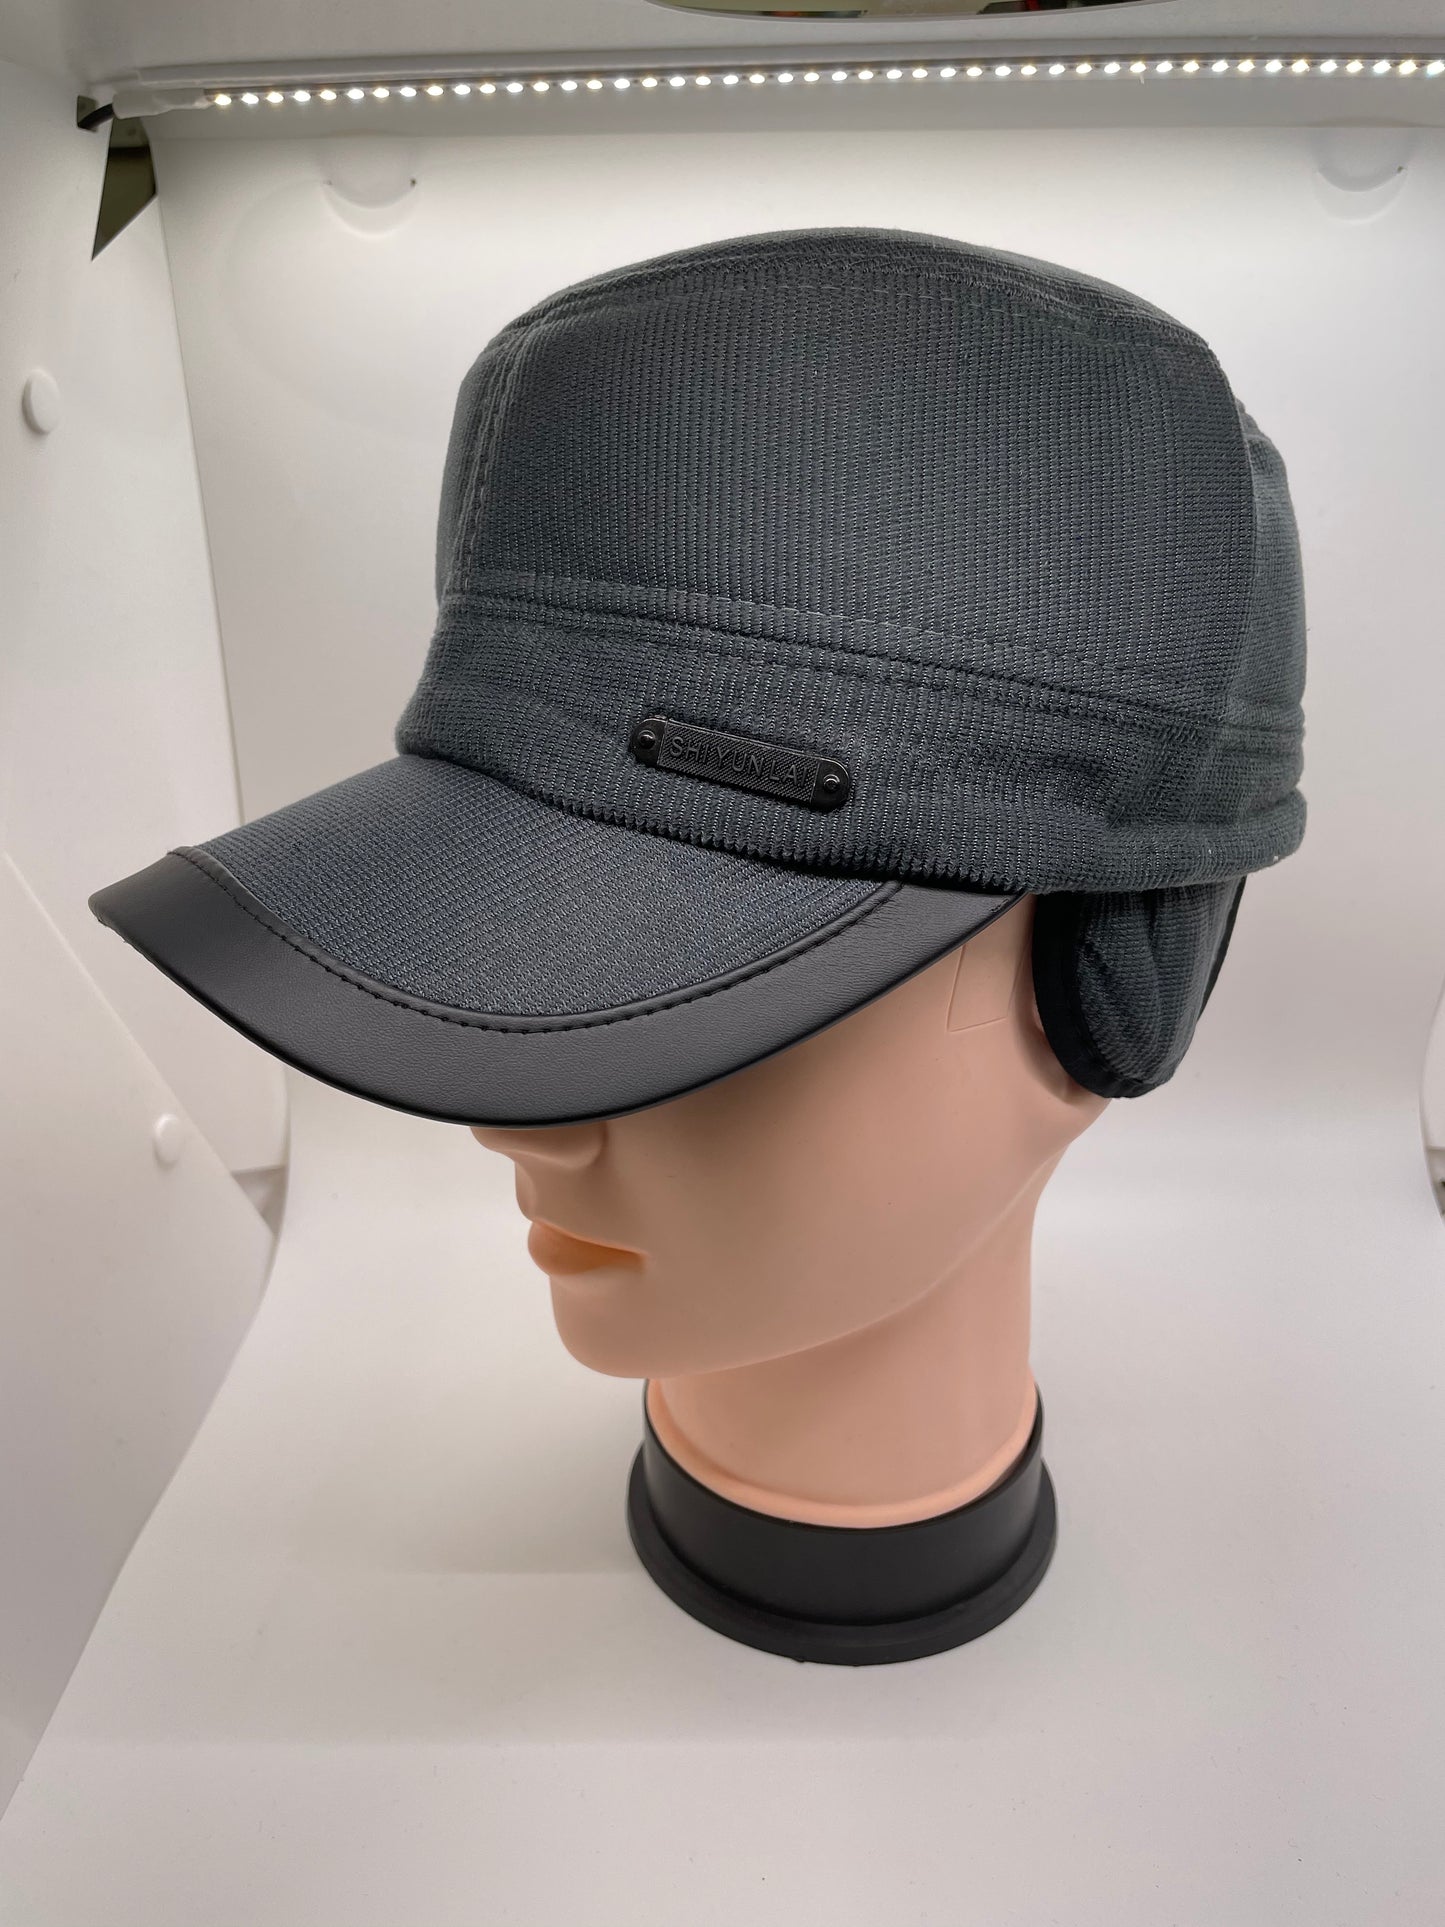 "Gray winter hat with ear flaps and a ribbed knit texture"